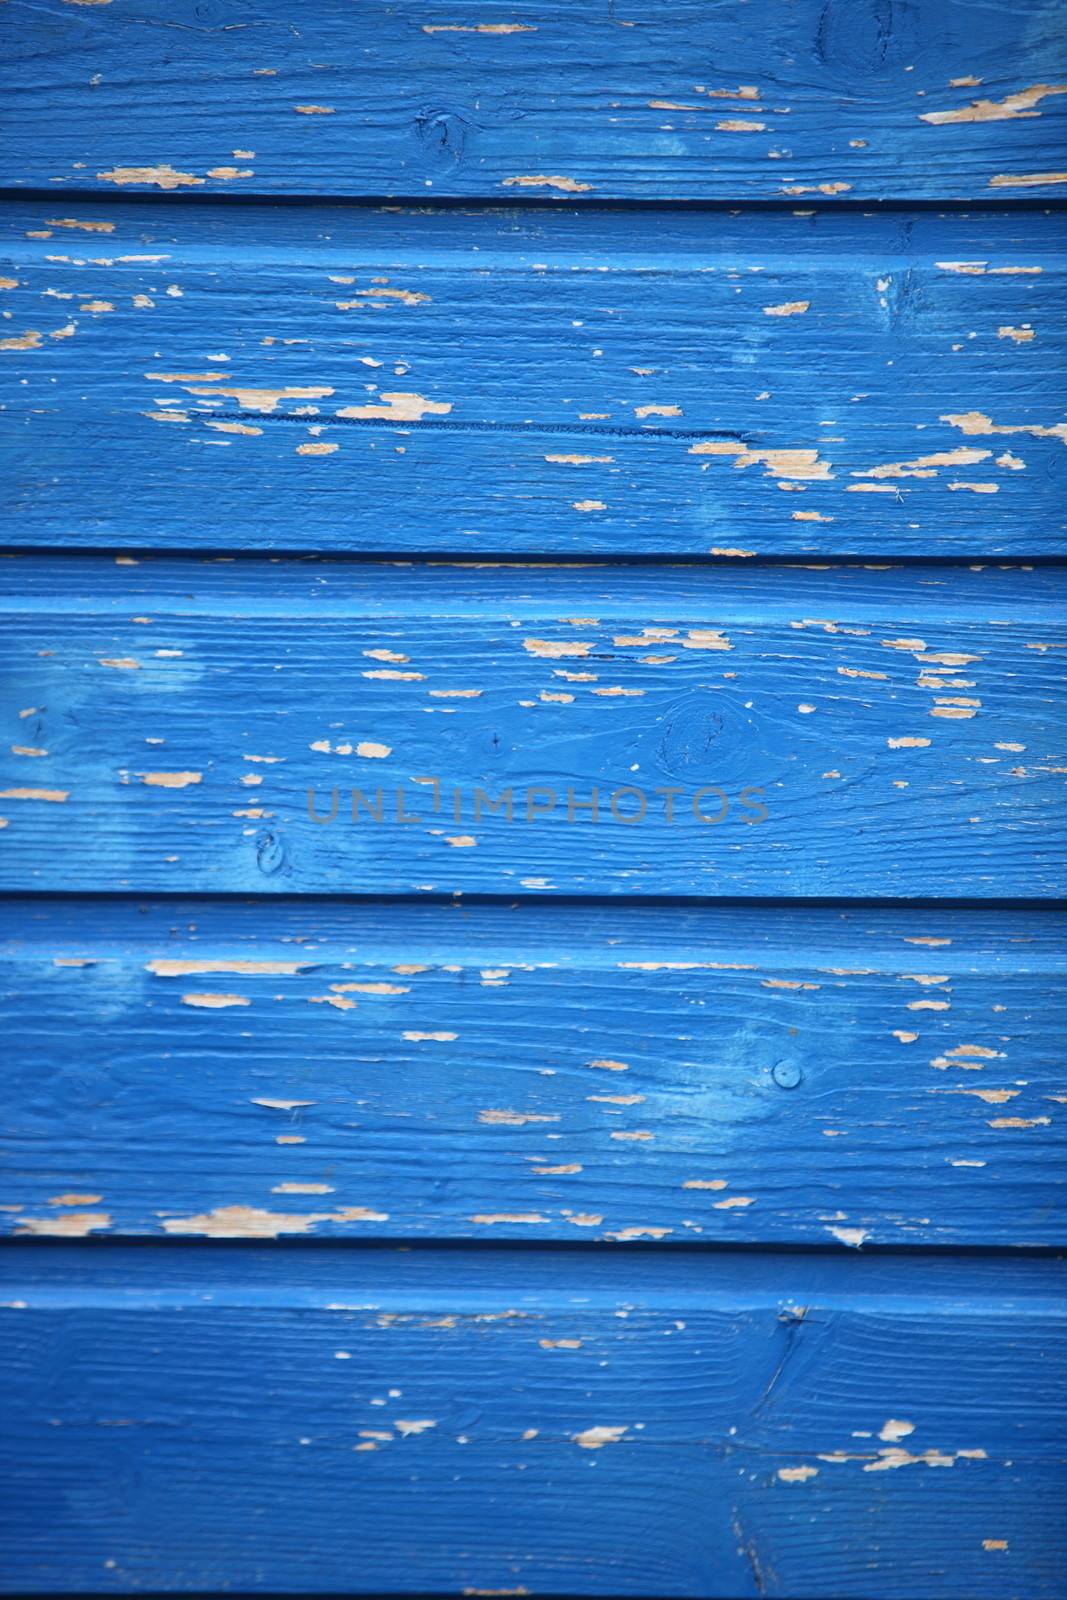 Texture of blue painted wooden planks by Farina6000